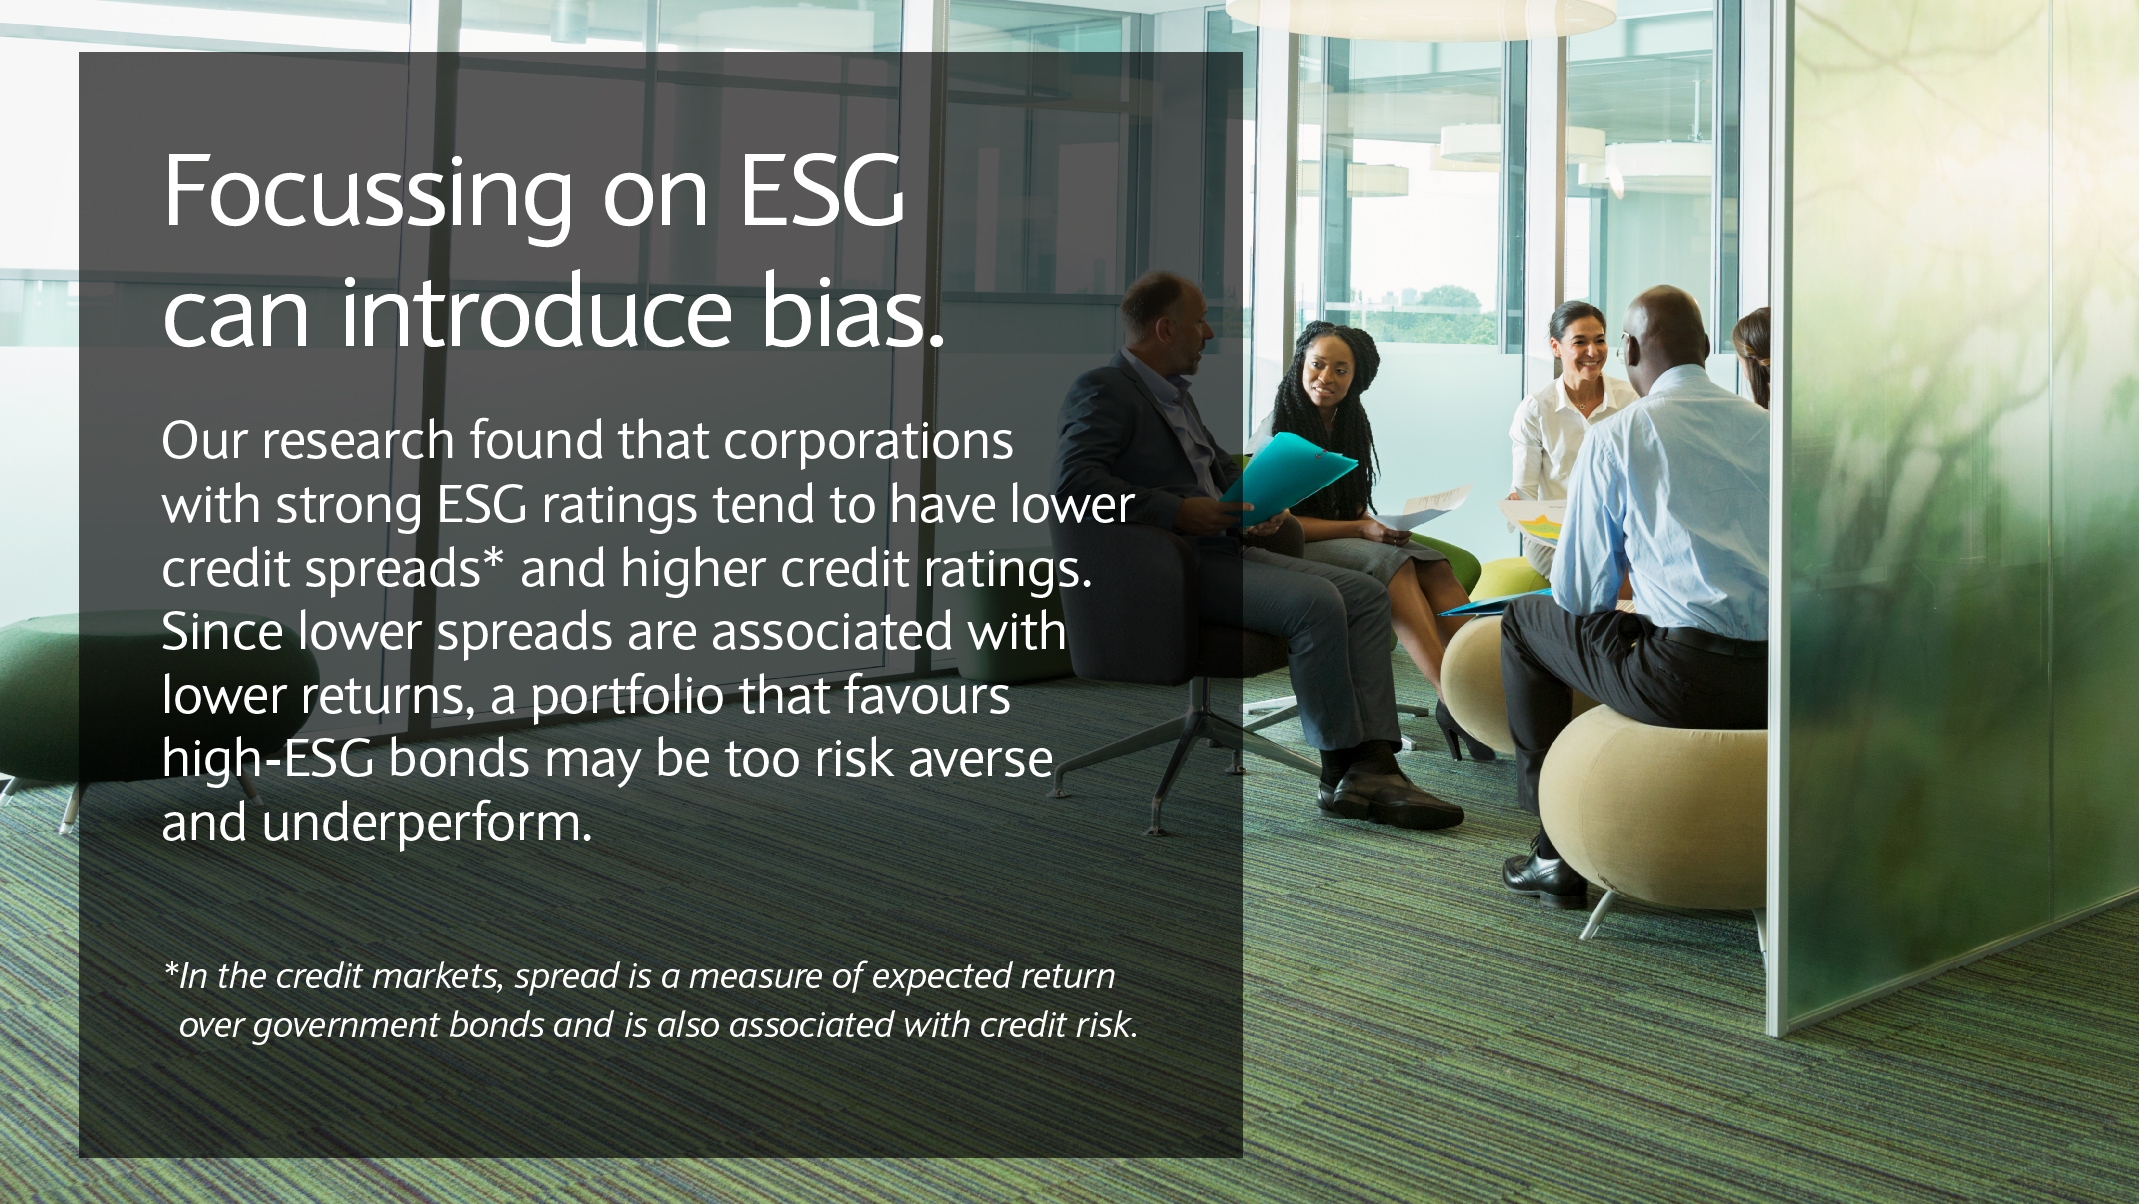 Focussing on ESG can introduce bias. Corporations with strong ESG ratings tend to have lower credit spreads.